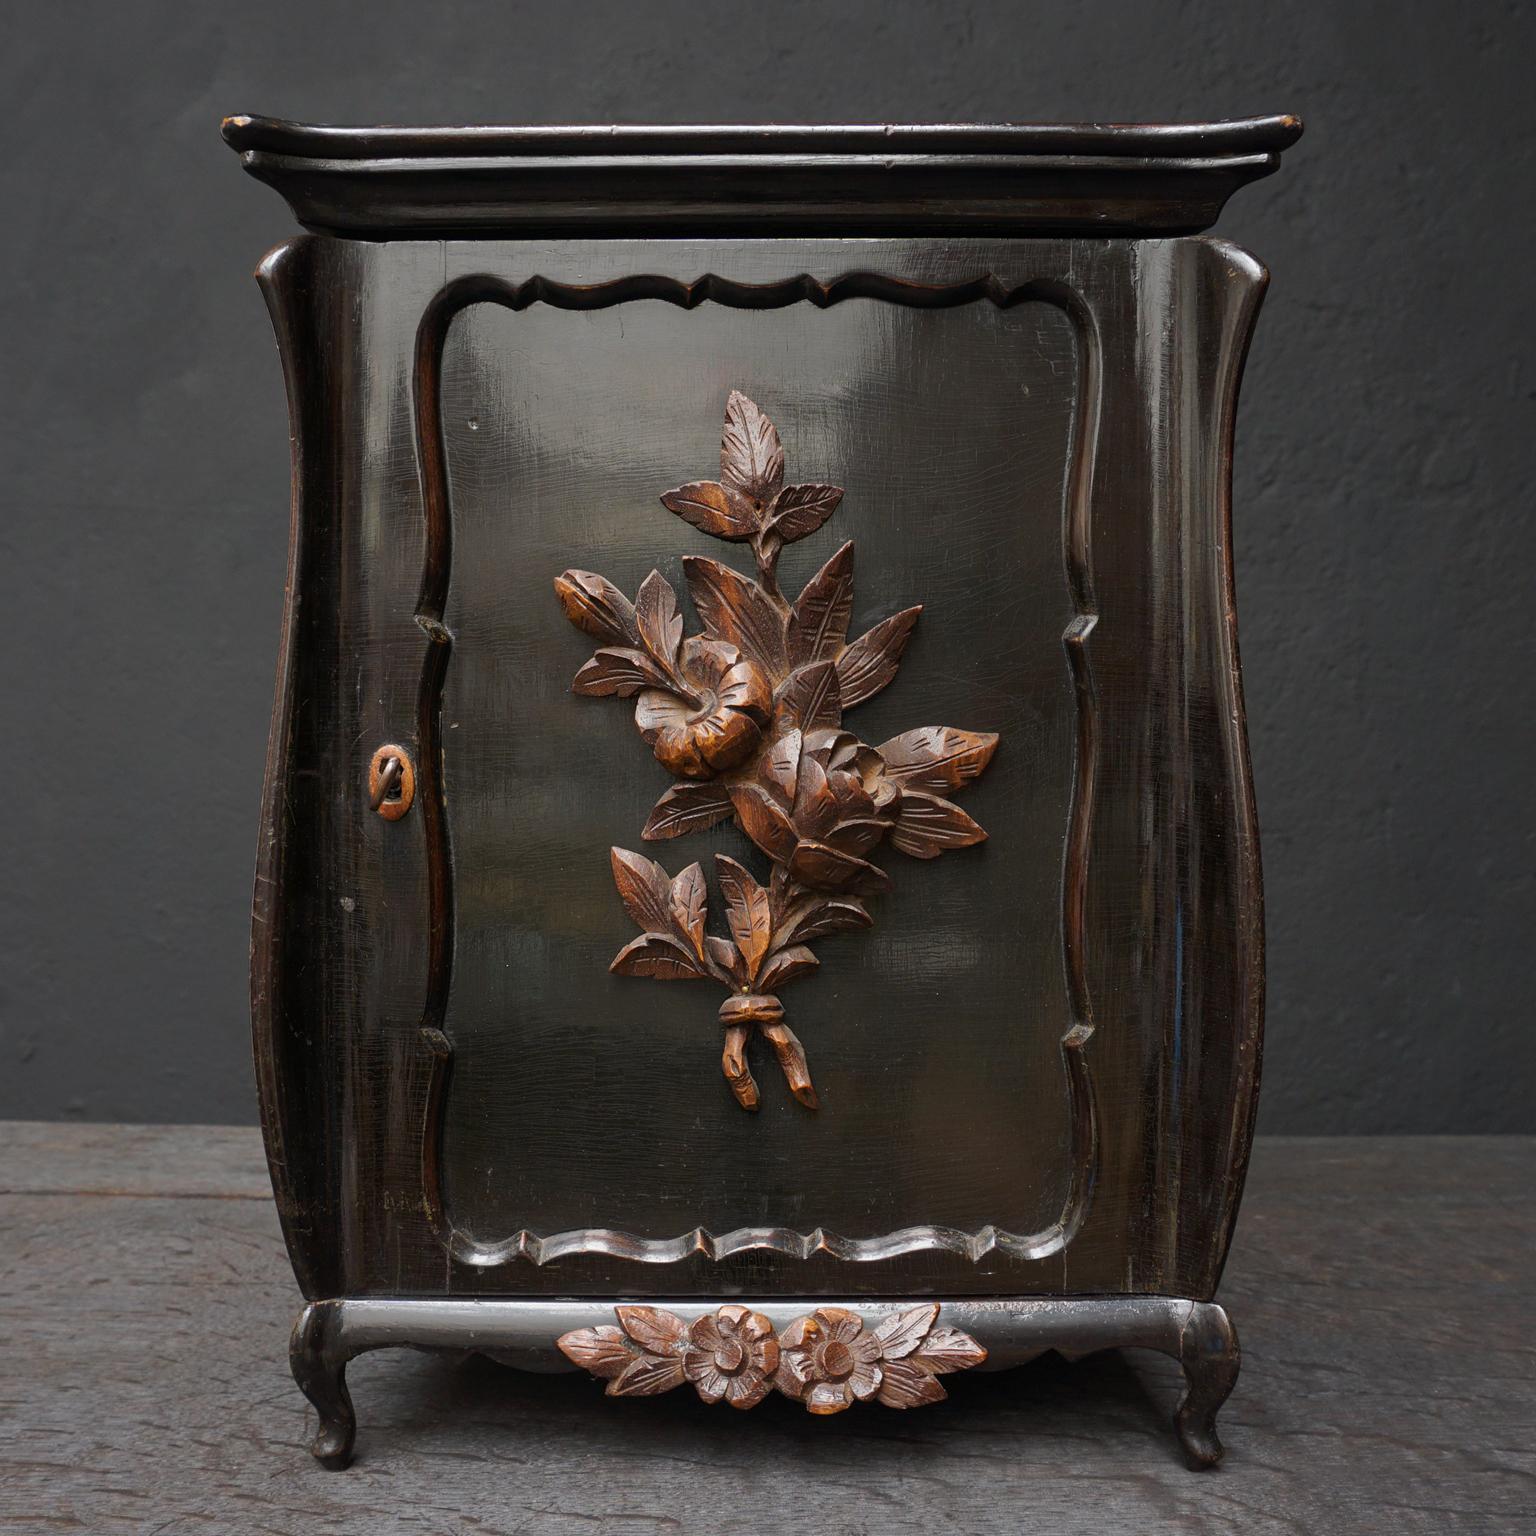 Adorable little 19th century Dutch oak and mahogany cigar cabinet with 5 drawers.
The oak drawers each are decorated at the front with glossy walnut and a little hand-turned handles.
The cabinet itself is made of blackened and carved oak and